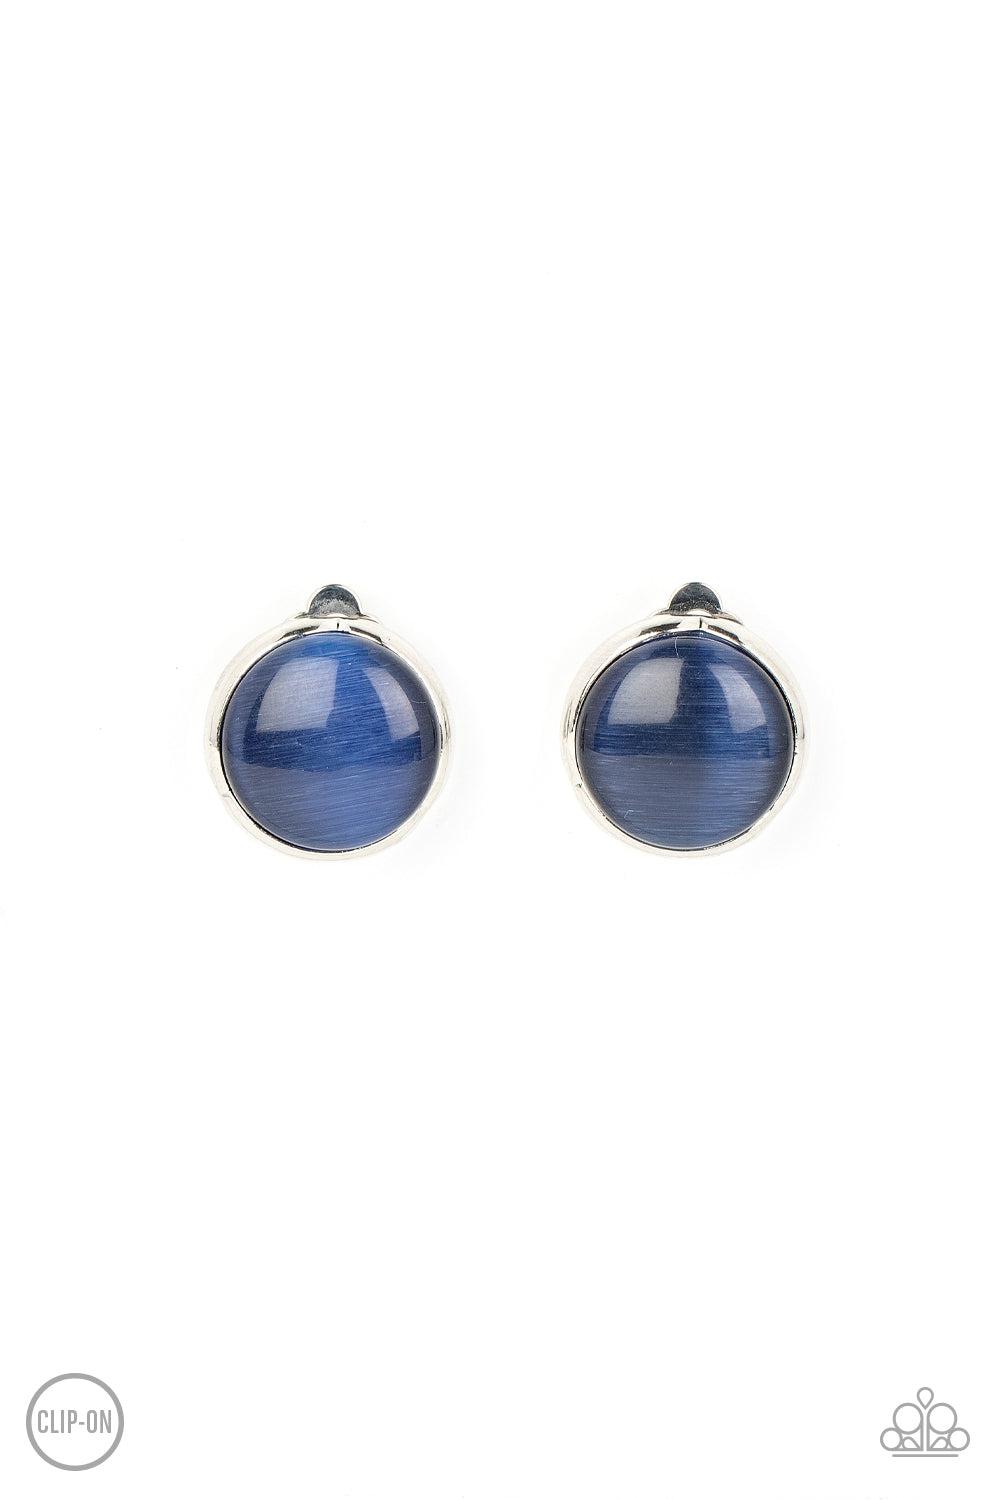 Cool Pools Blue Cat's Eye Stone Clip-On Earrings - Paparazzi Accessories- lightbox - CarasShop.com - $5 Jewelry by Cara Jewels